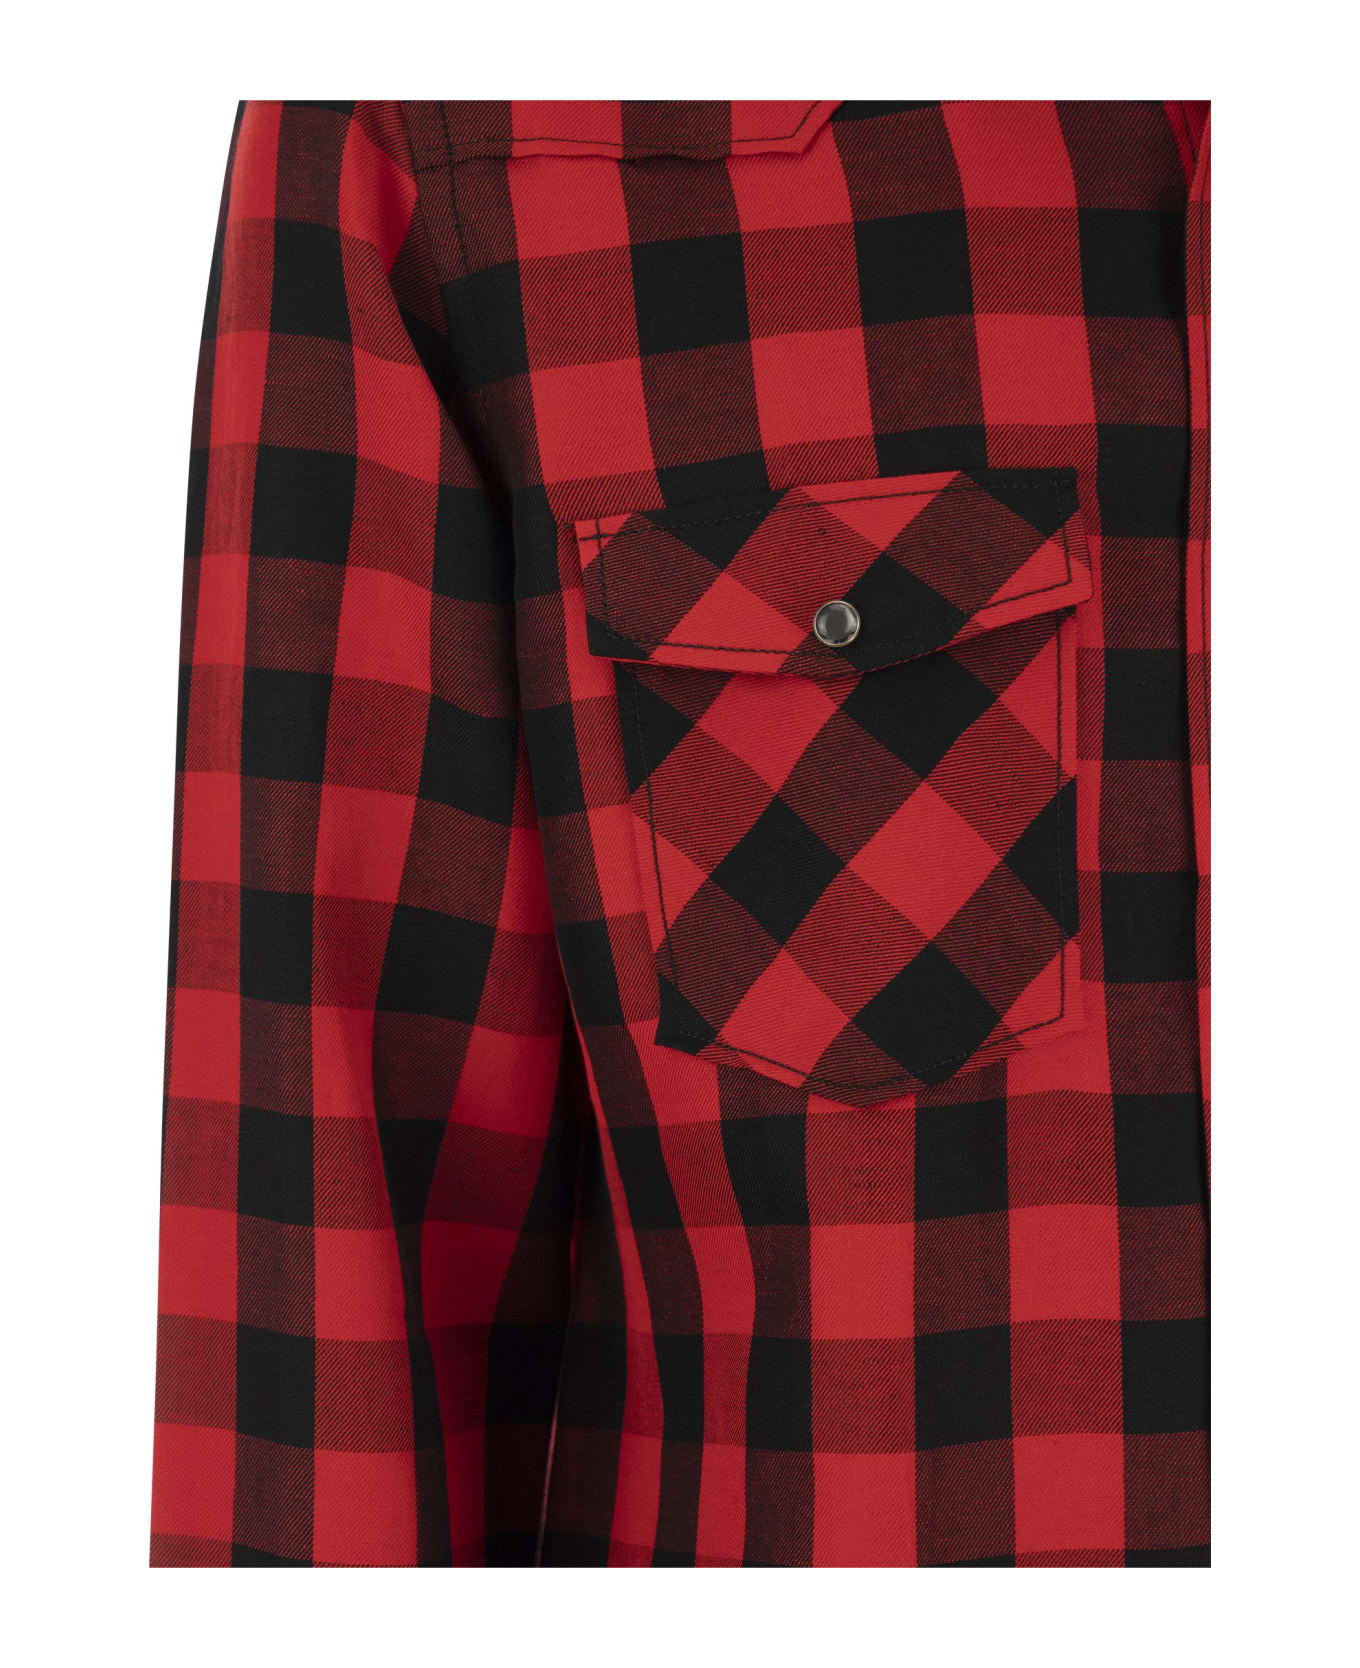 PT01 Checked Shirt In Cotton And Linen Blend - Red/black